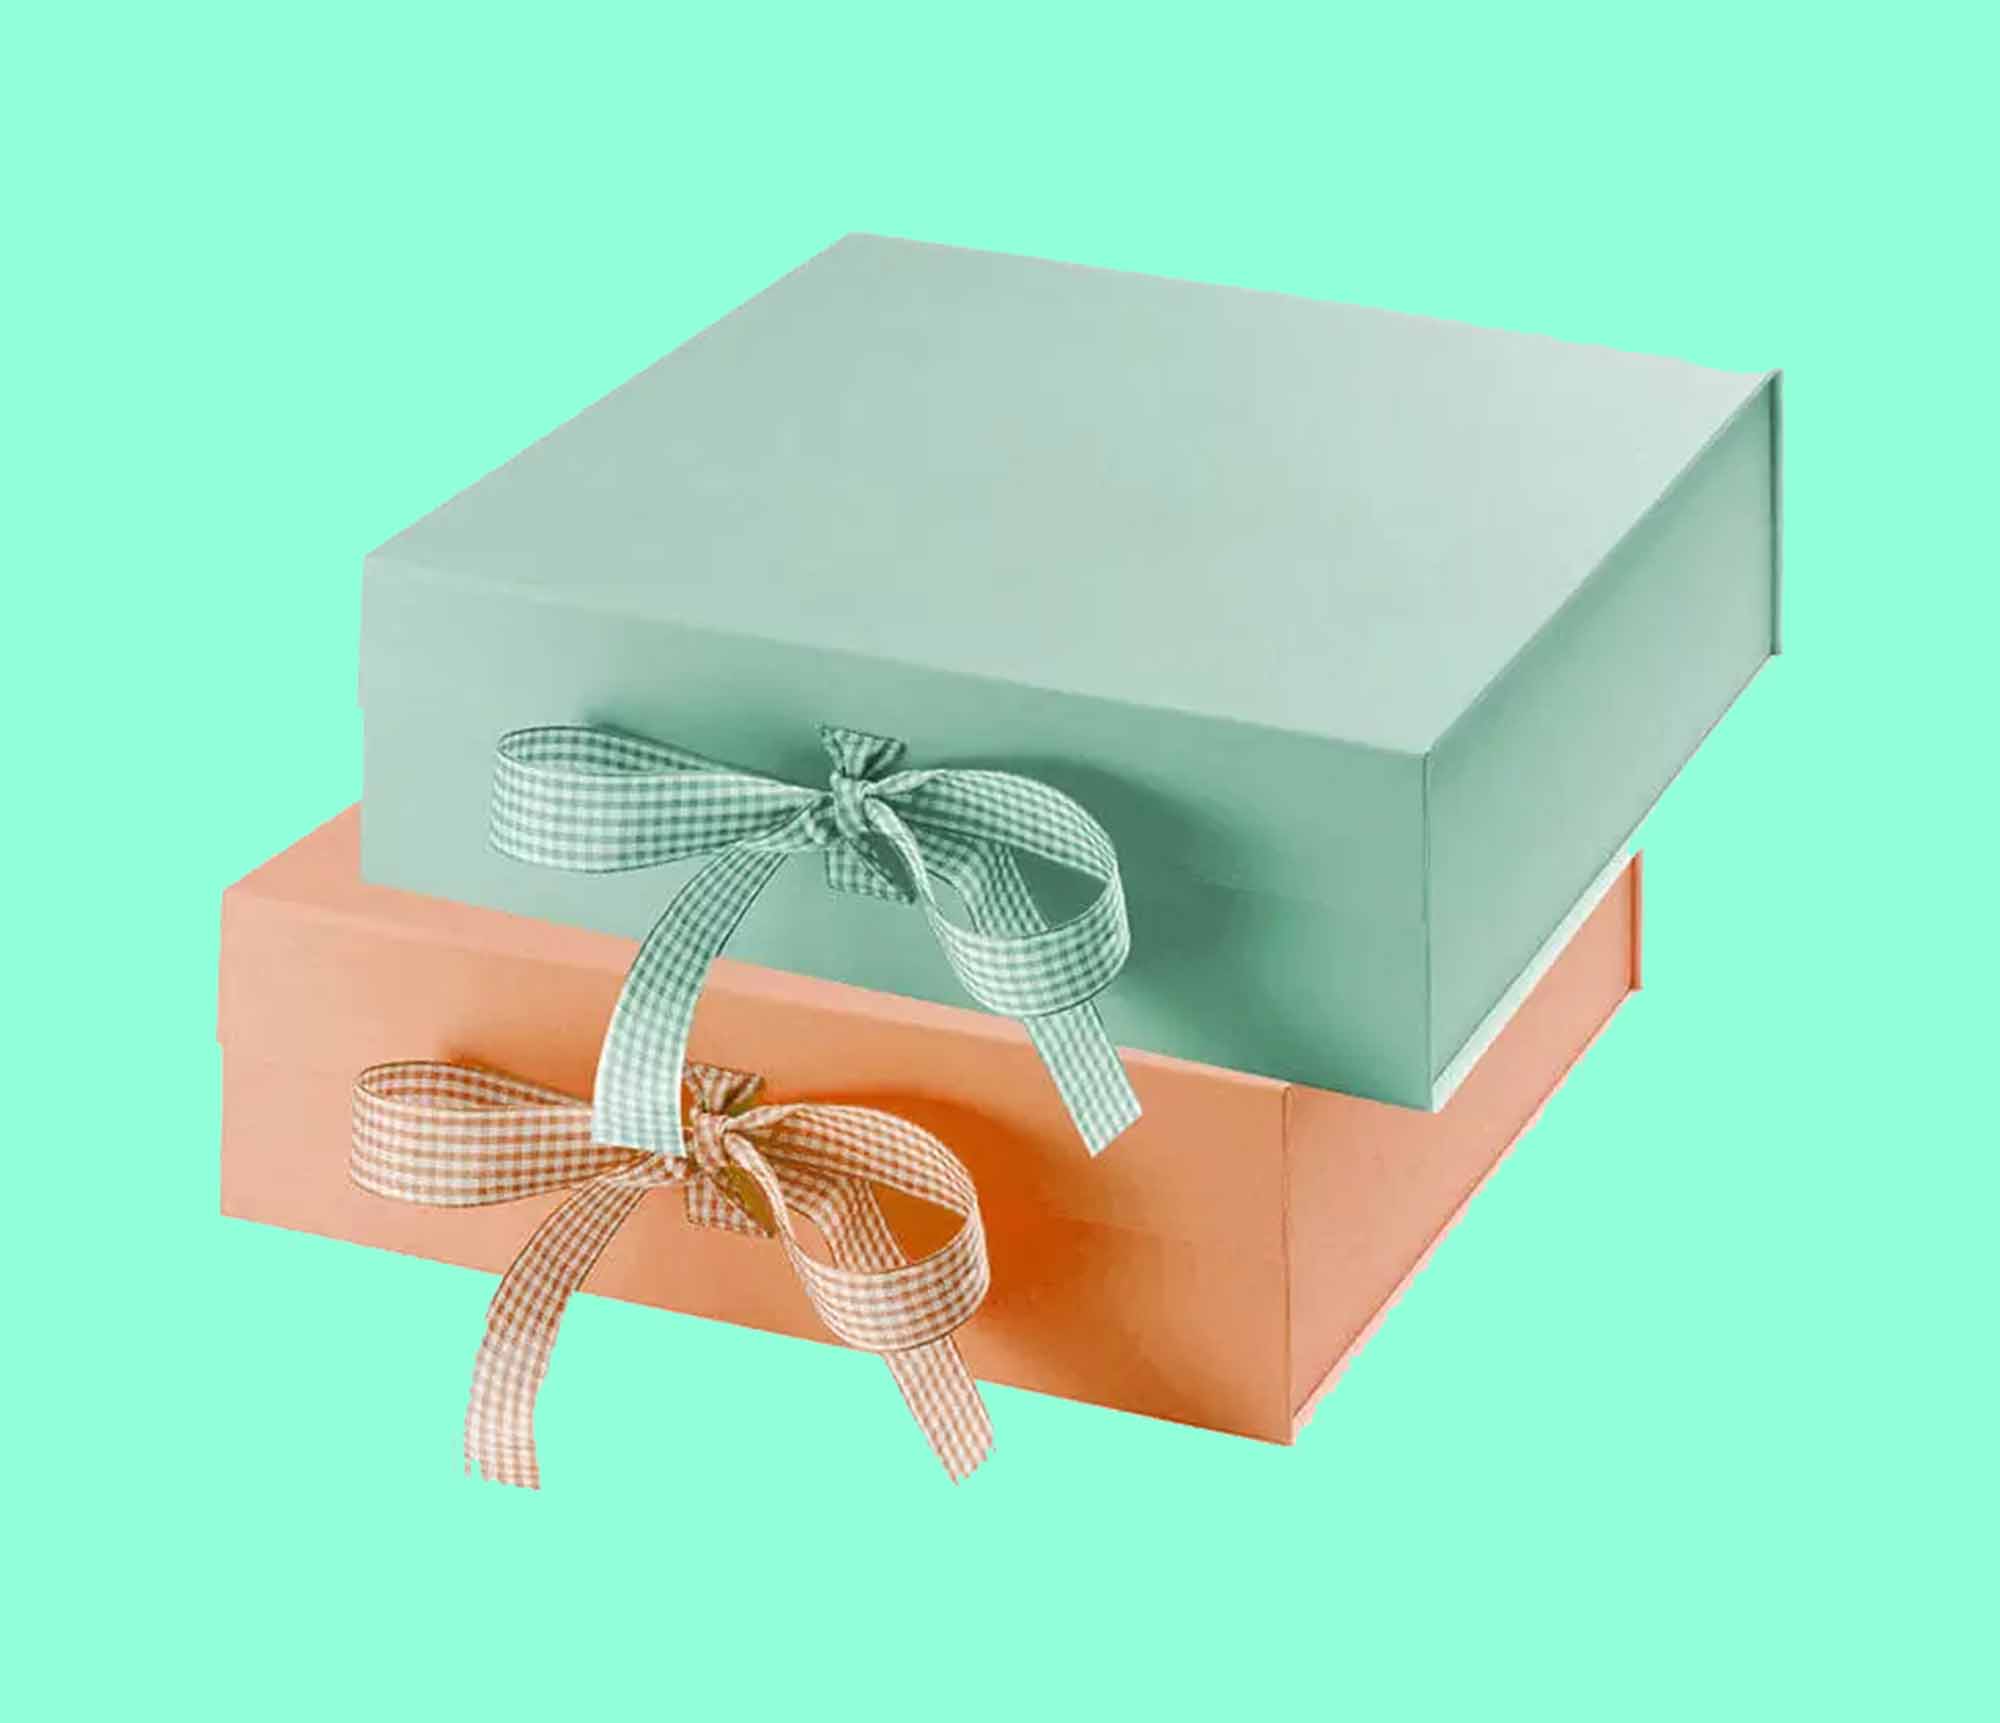 Personalized Gift Boxes